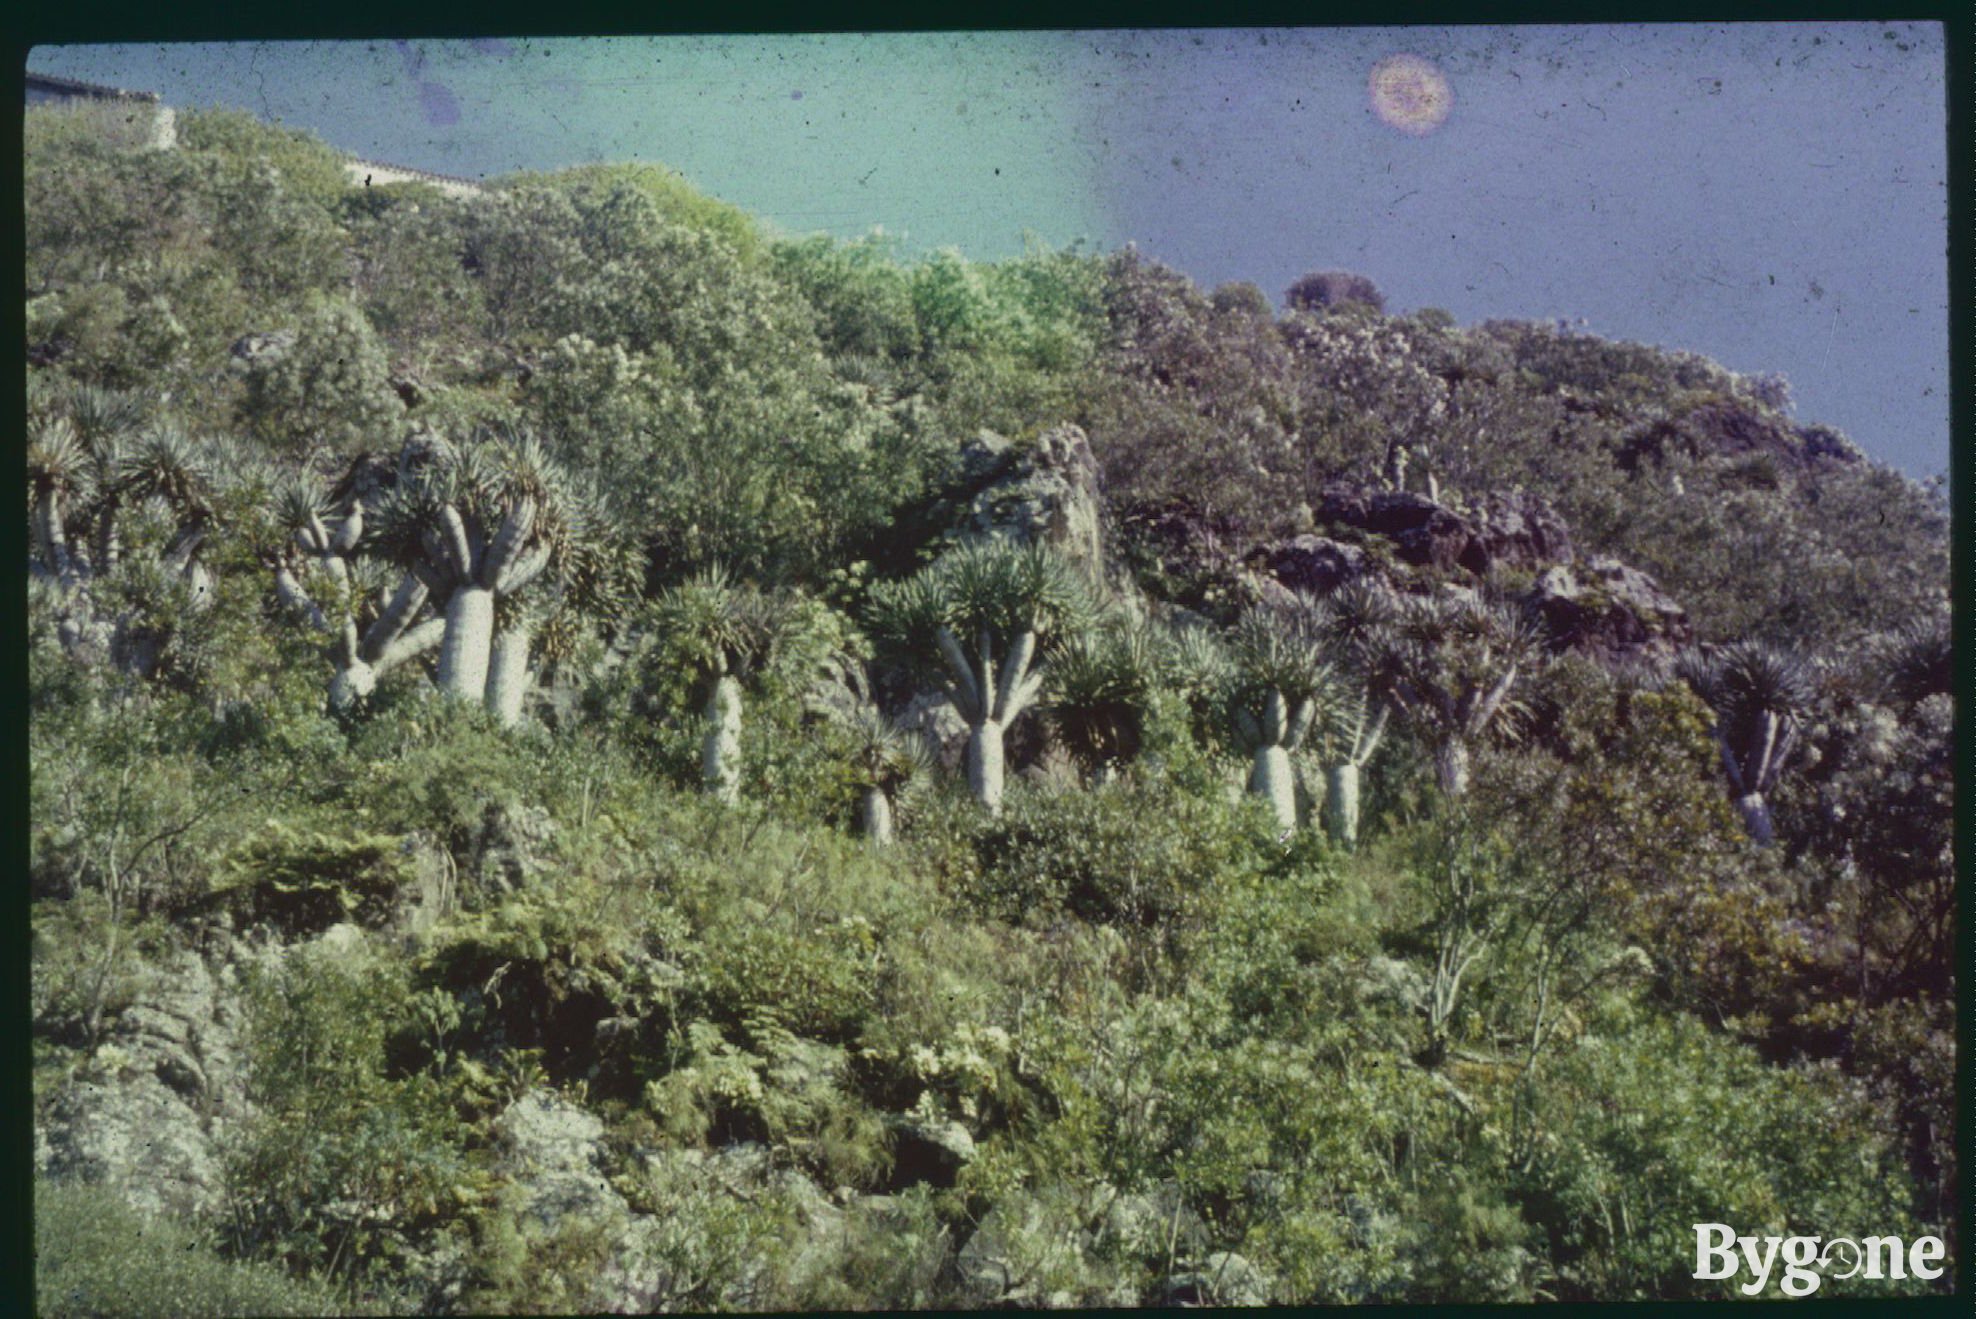 A rocky hillside with a row of yucca trees amongst vegetation and grass overgrowing.